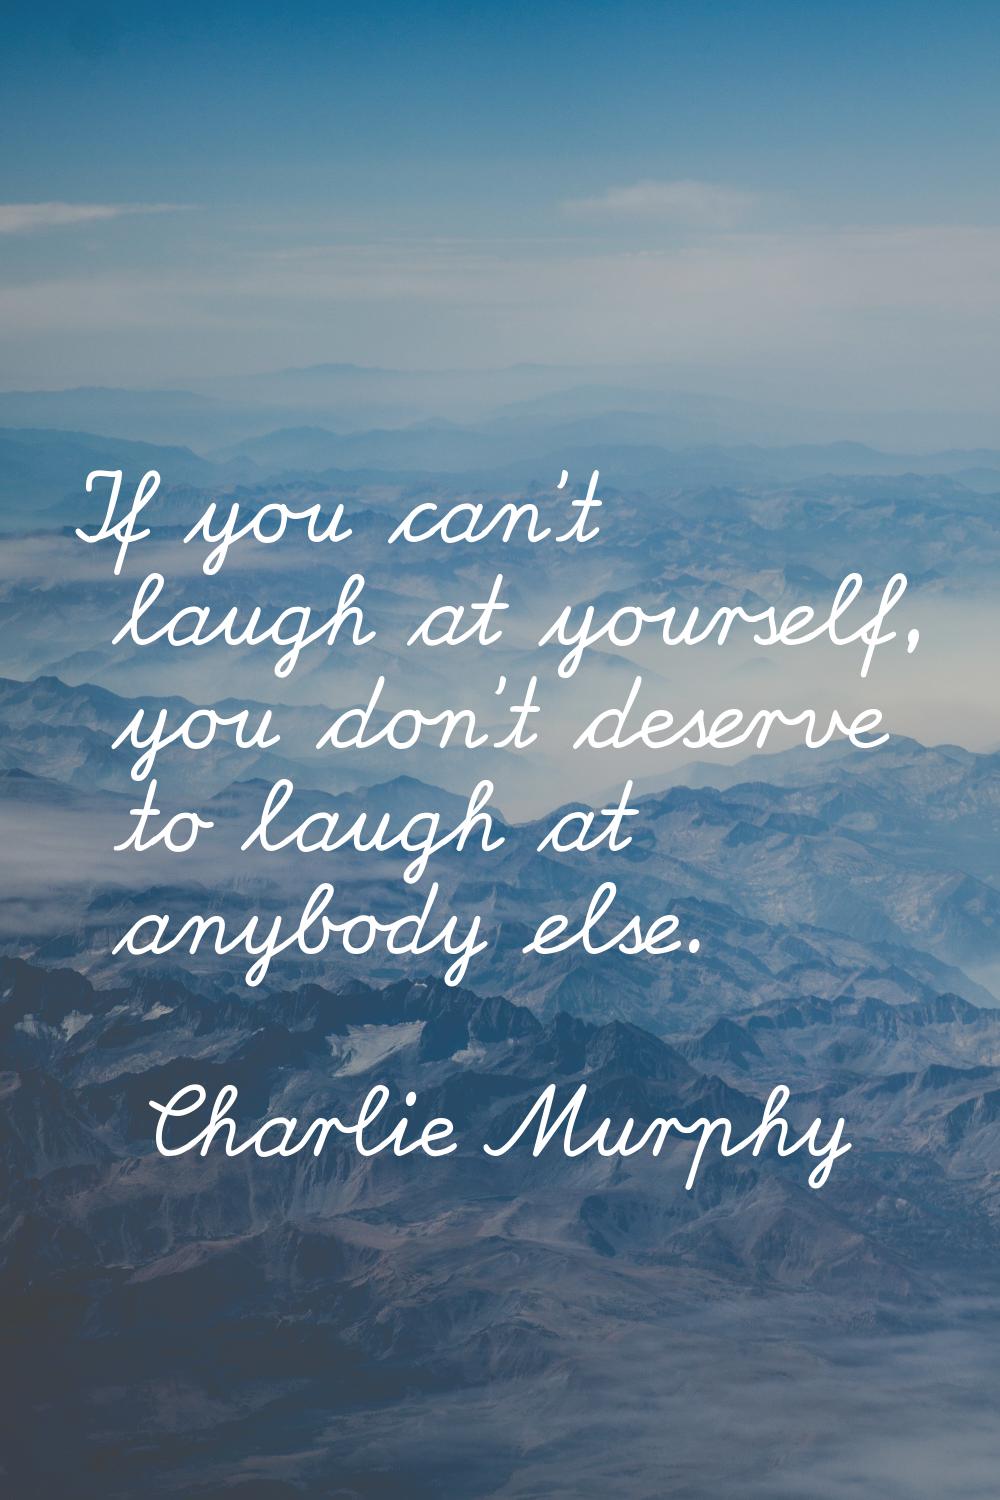 If you can't laugh at yourself, you don't deserve to laugh at anybody else.